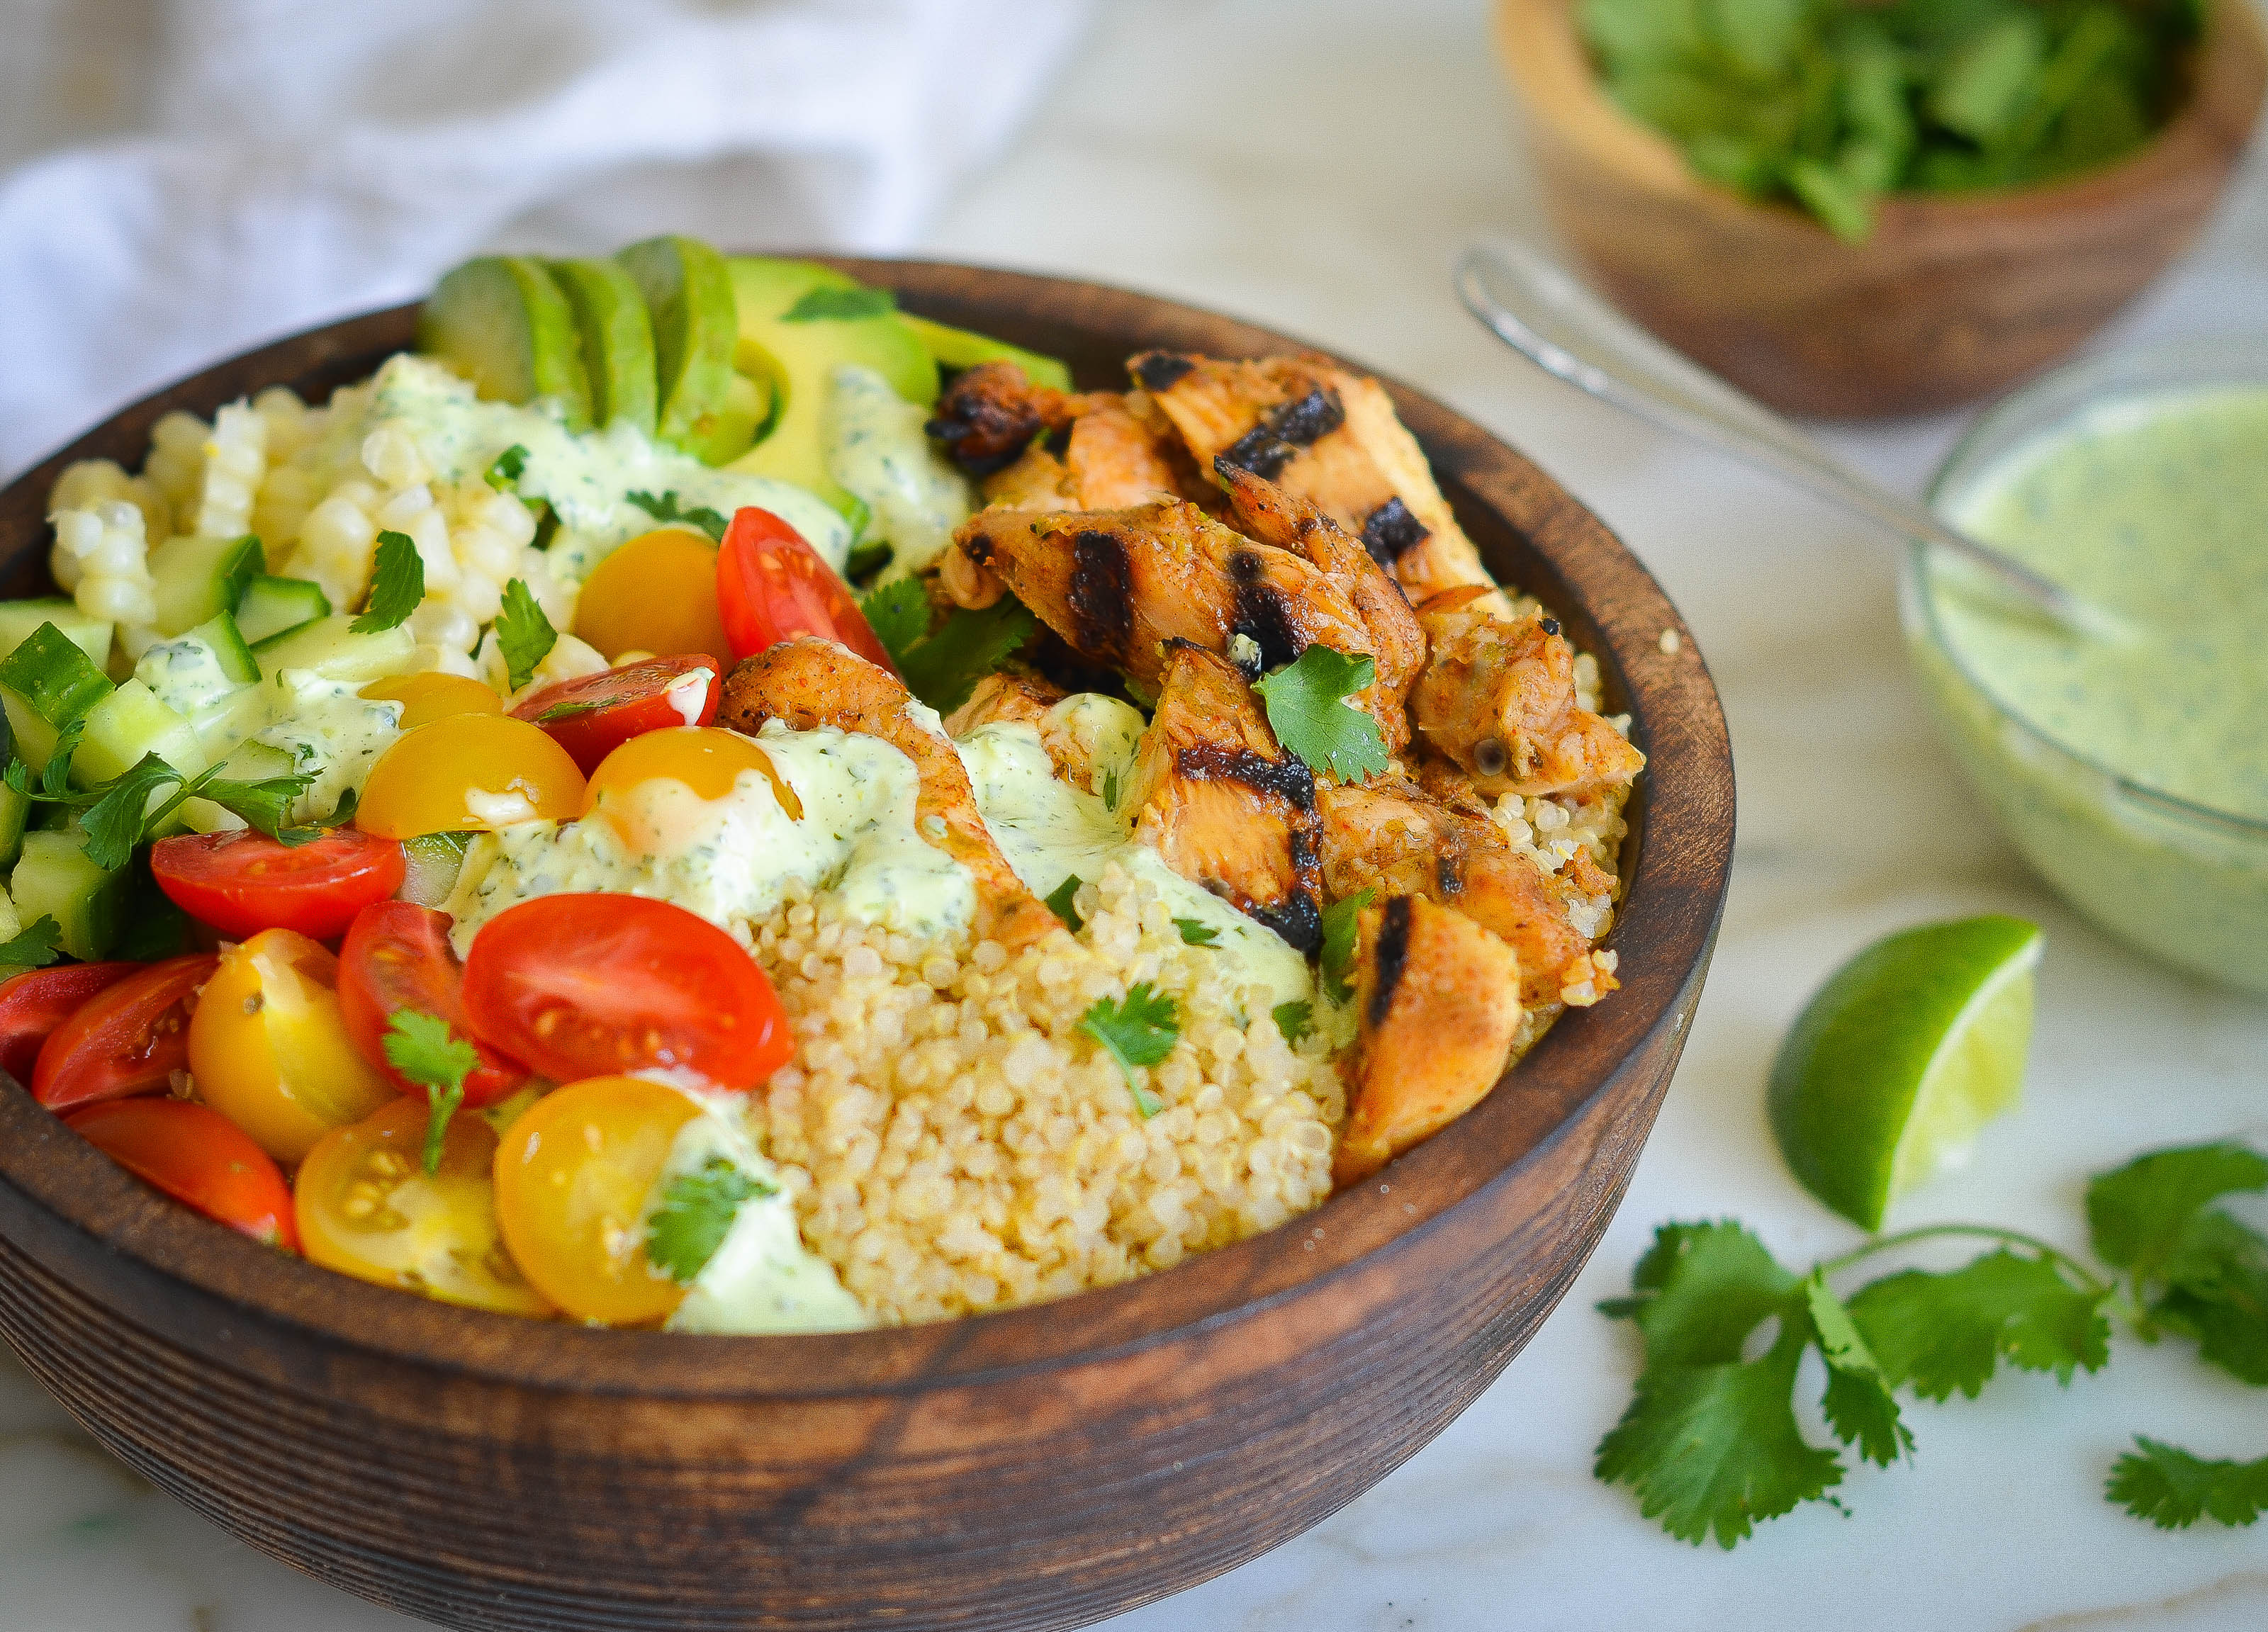 Grilled Chicken and Quinoa Meal Prep Bowls - Eating Bird Food